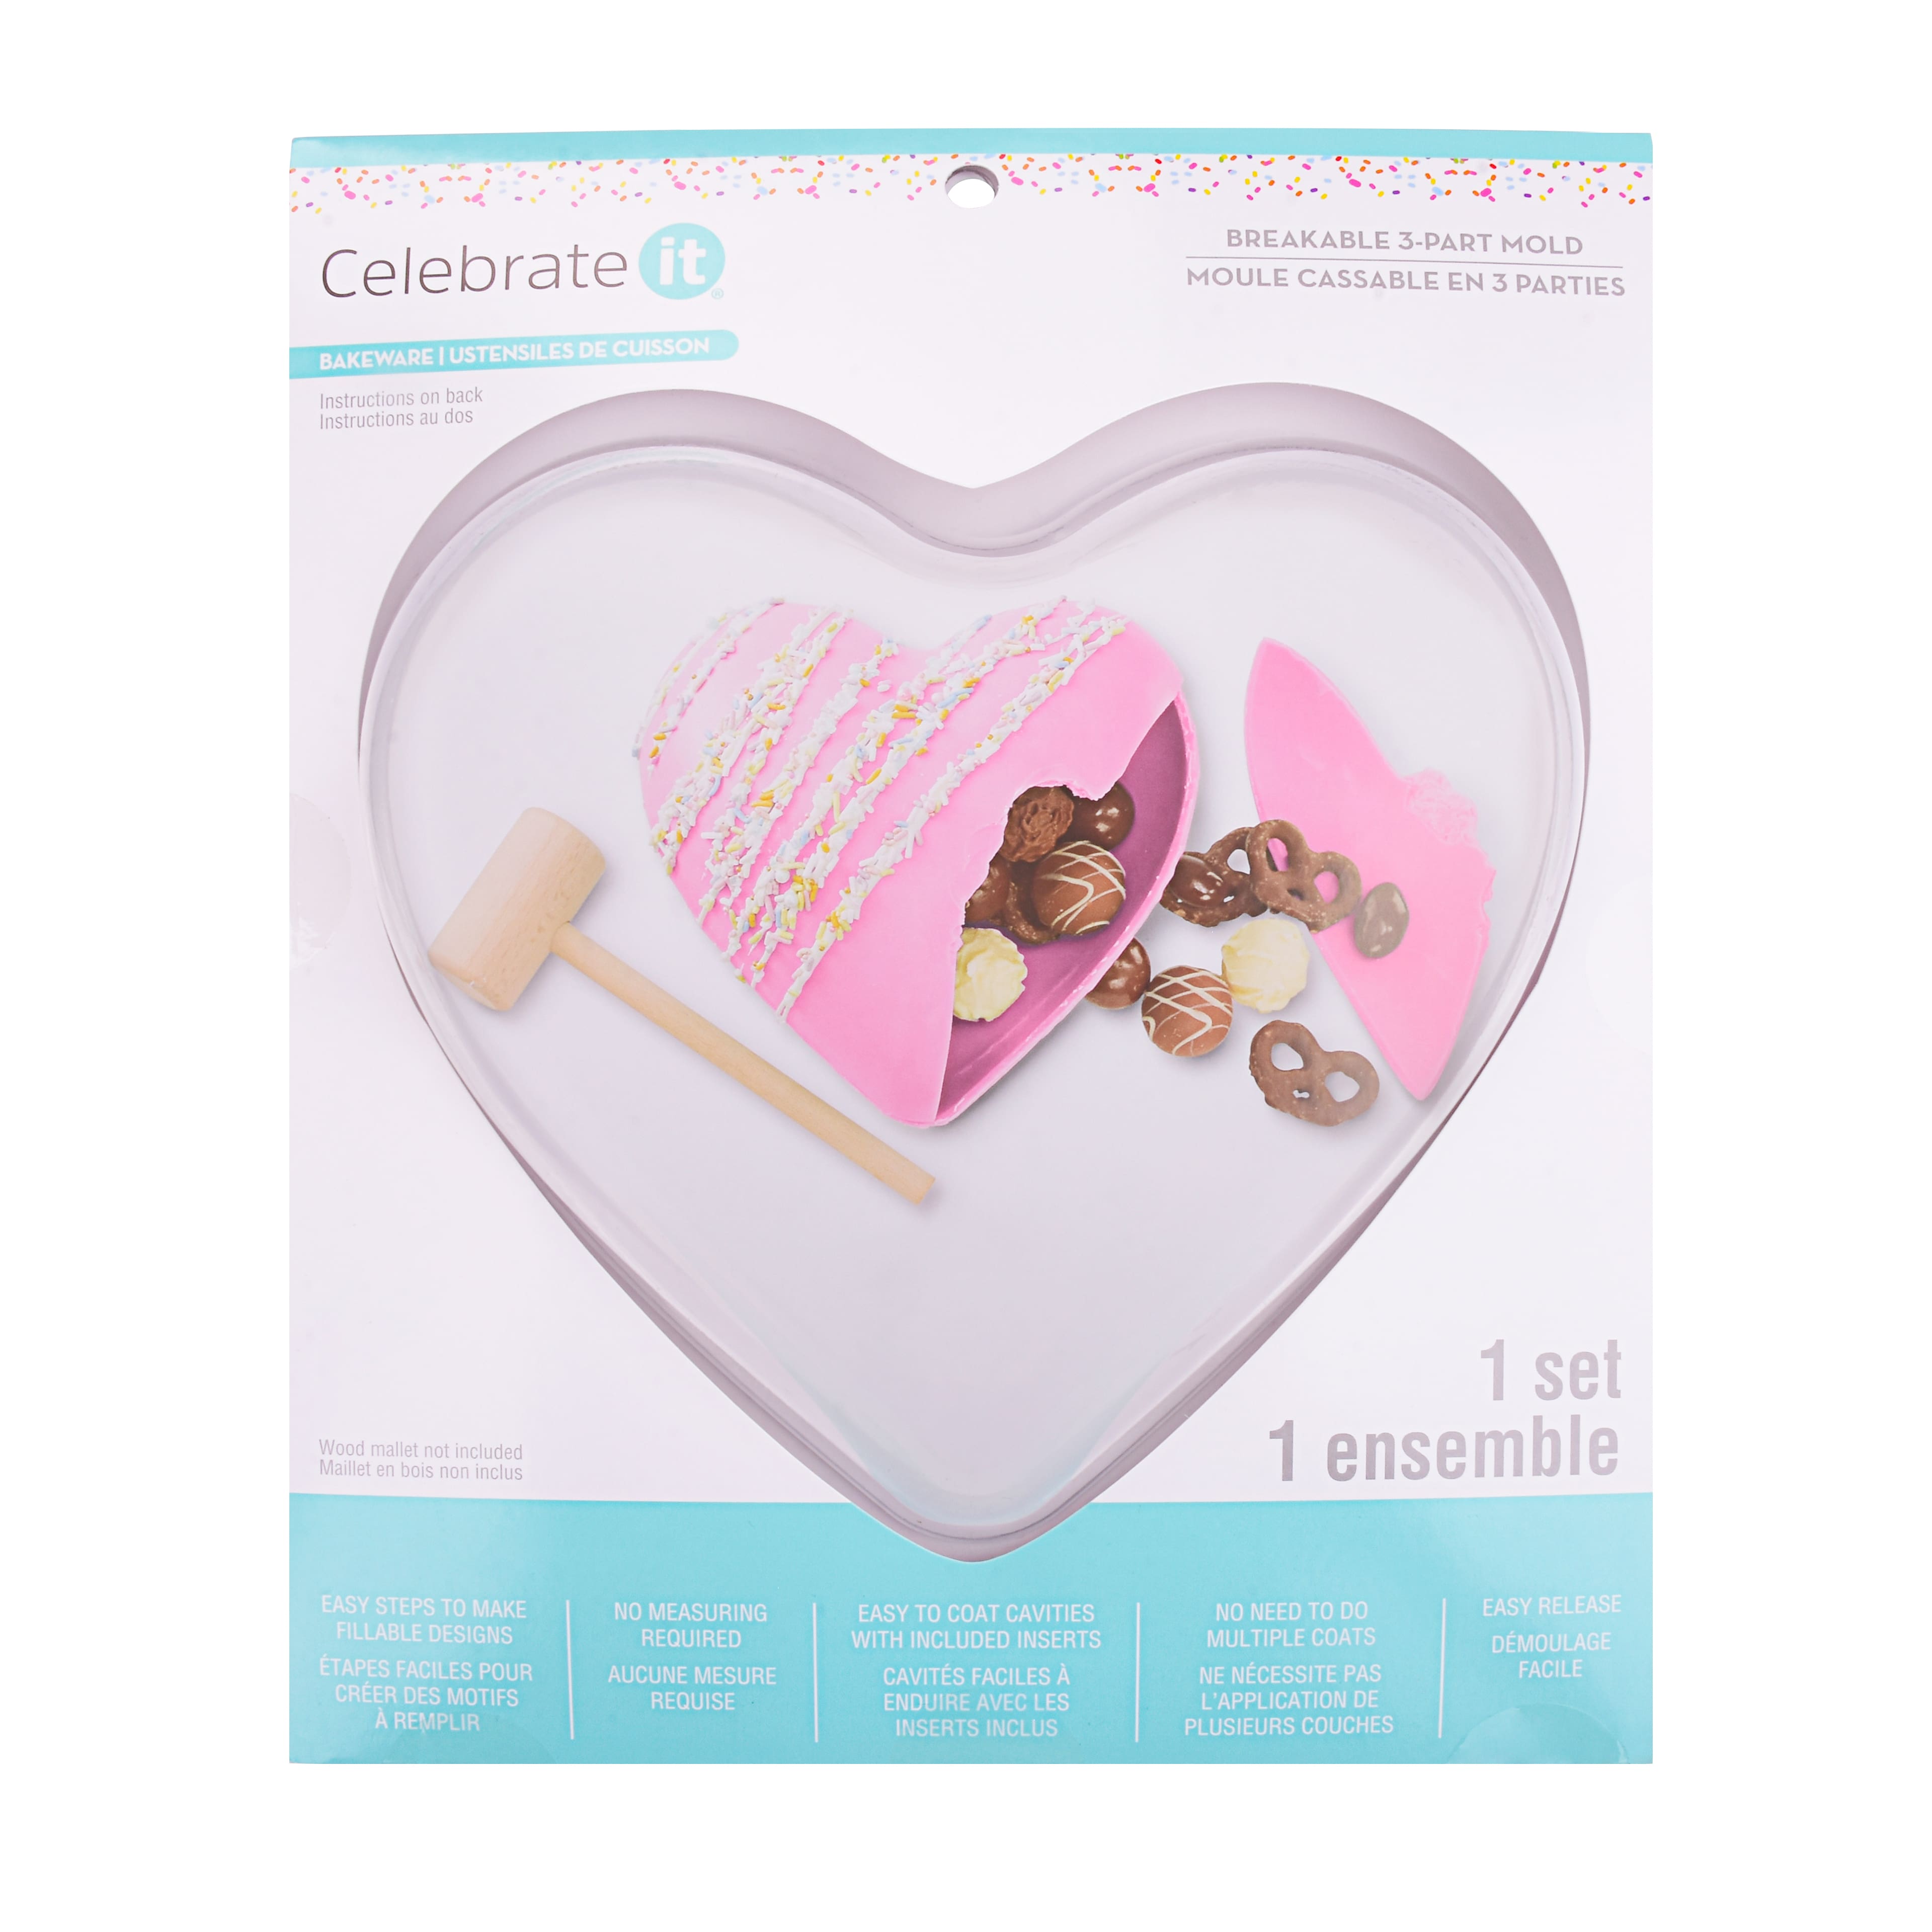 Yellow Breakable Heart Mold with Chocolate – Bubbles Gift